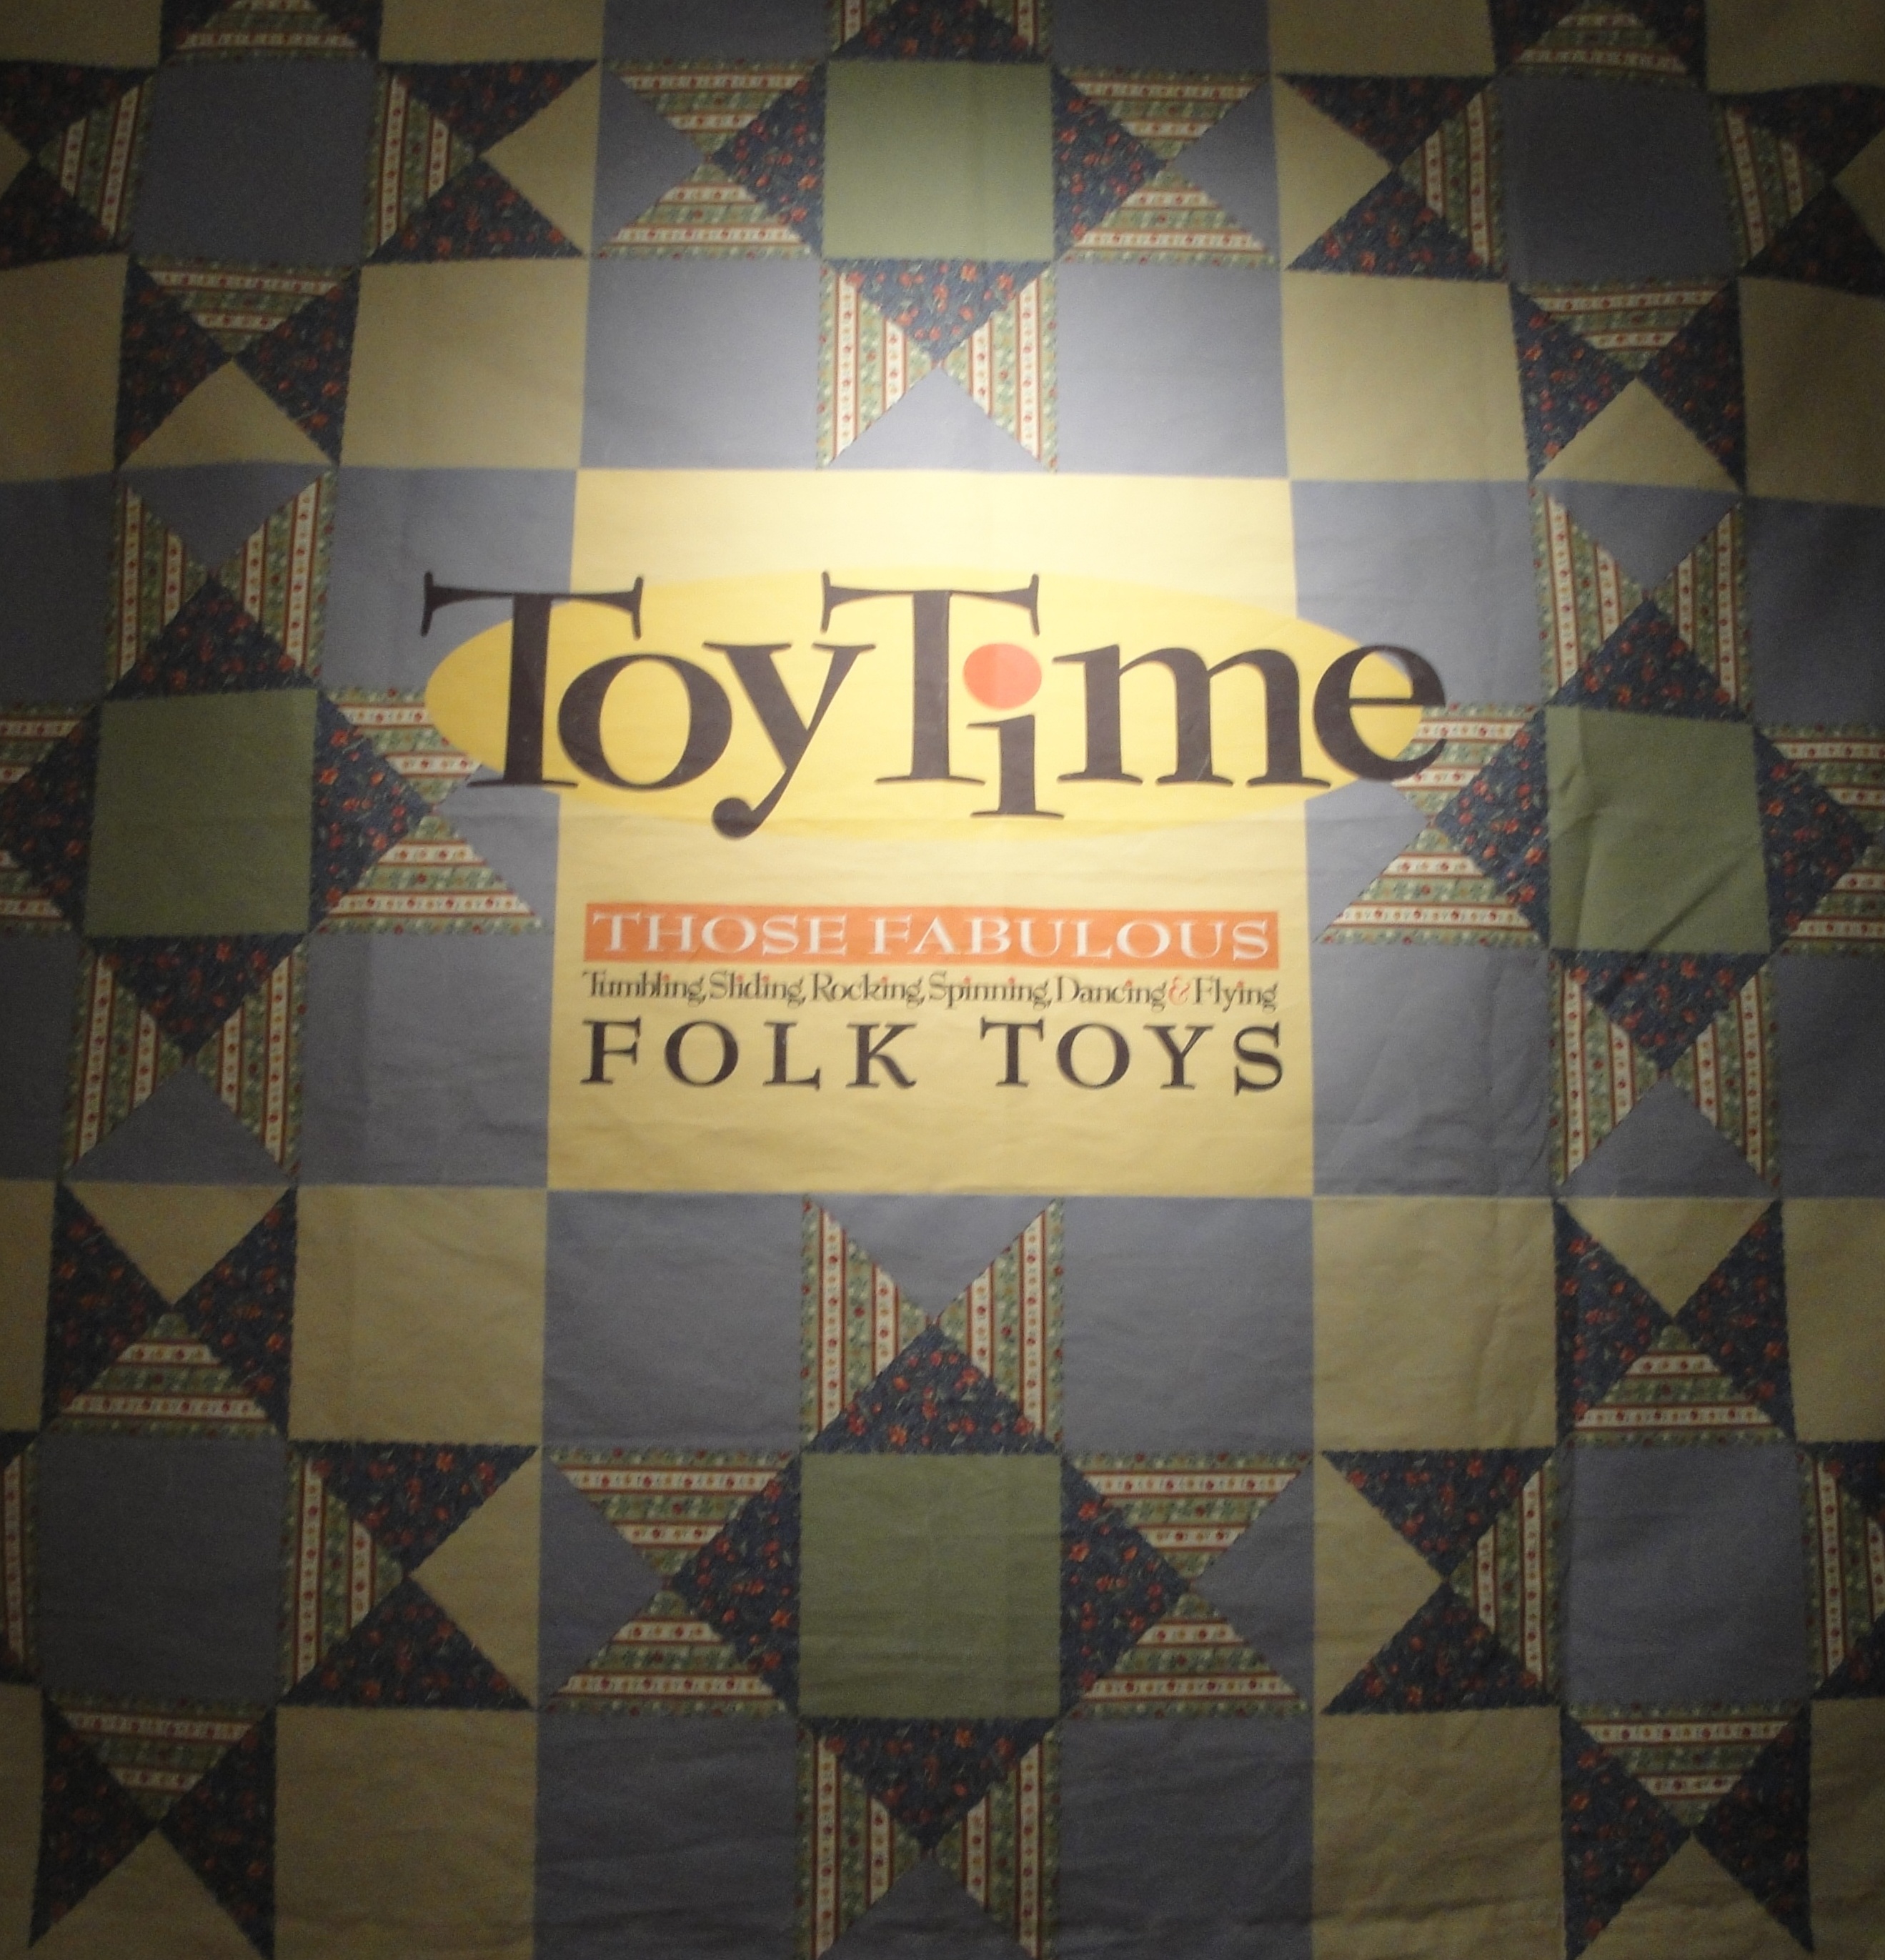 North Myrtle Beach Historical Museum  Toy Time Exhibit